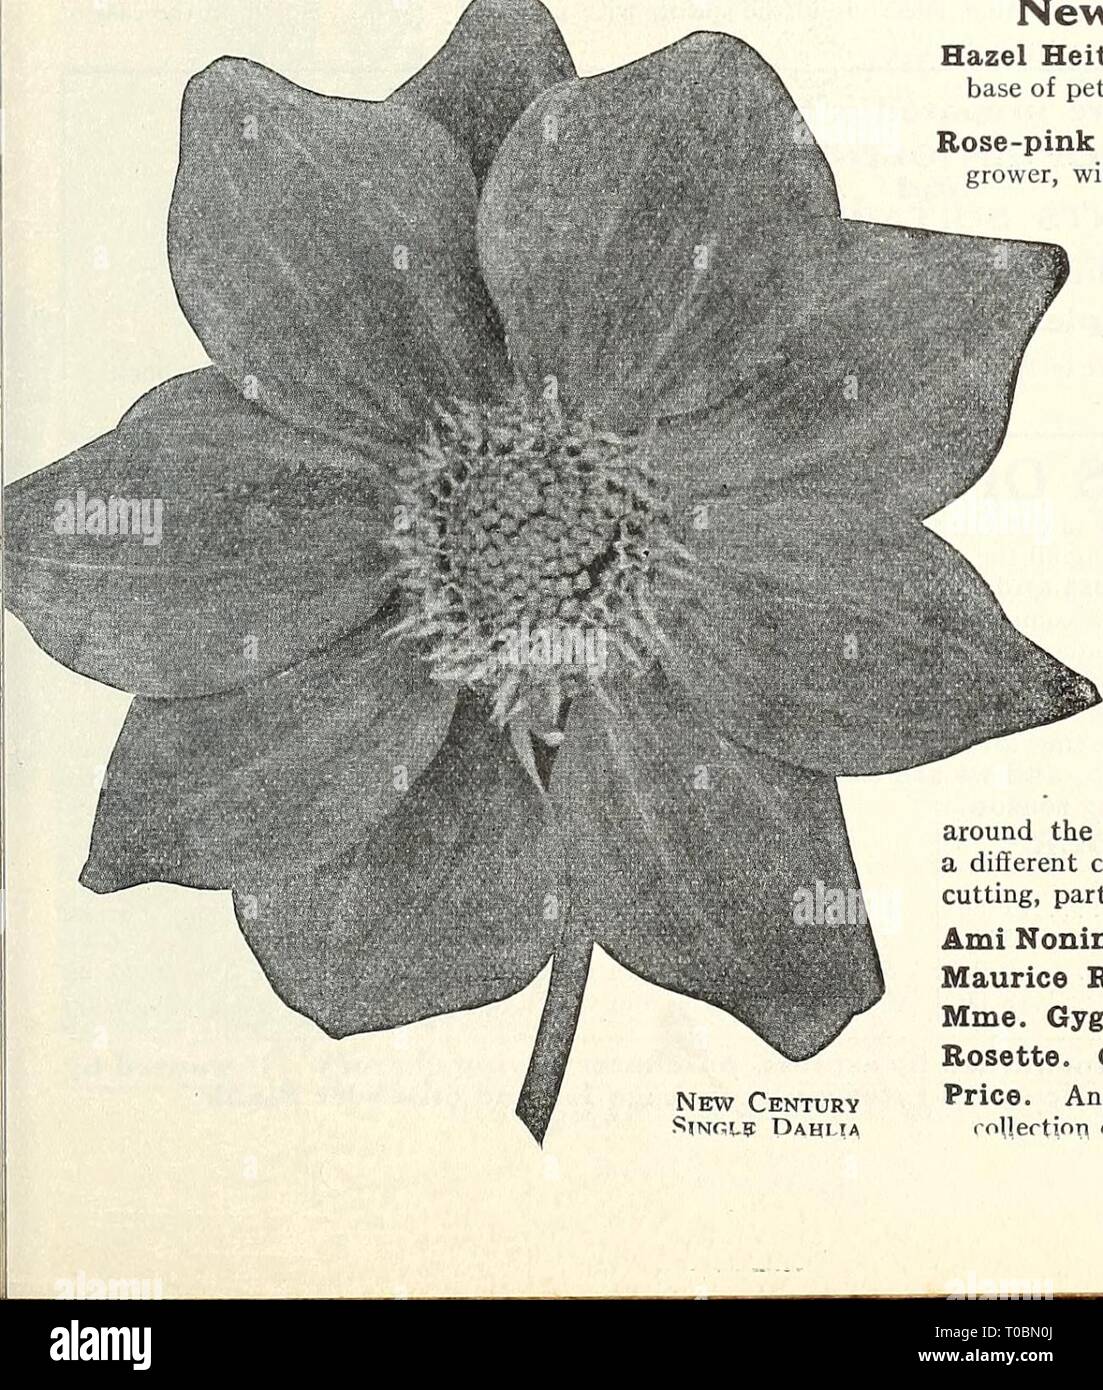 Dreer's garden book 1930 (1930) Dreer's garden book 1930 dreersgardenbook1930henr Year: 1930  New Century Sinols Dahlia Peony Dahlia, Mme. Paul Aubrey Vivandiere. Of immense size and great depth; color a lively cherry-carmine, shading lighter towards the tips. 75 cts. each. The Mahdi. A very large fancy Peony of good form, of a rich blood-red mottled and streaked with creamy-white and yellow; a very attractive flower. 75 cts. each. One each of the 10 varieties for $5.00 New Century Single Dahlias Hazel Heiter. Bright crimson-carmine, with deeper shadings, base of petals canary-yellow. Rose-pin Stock Photo